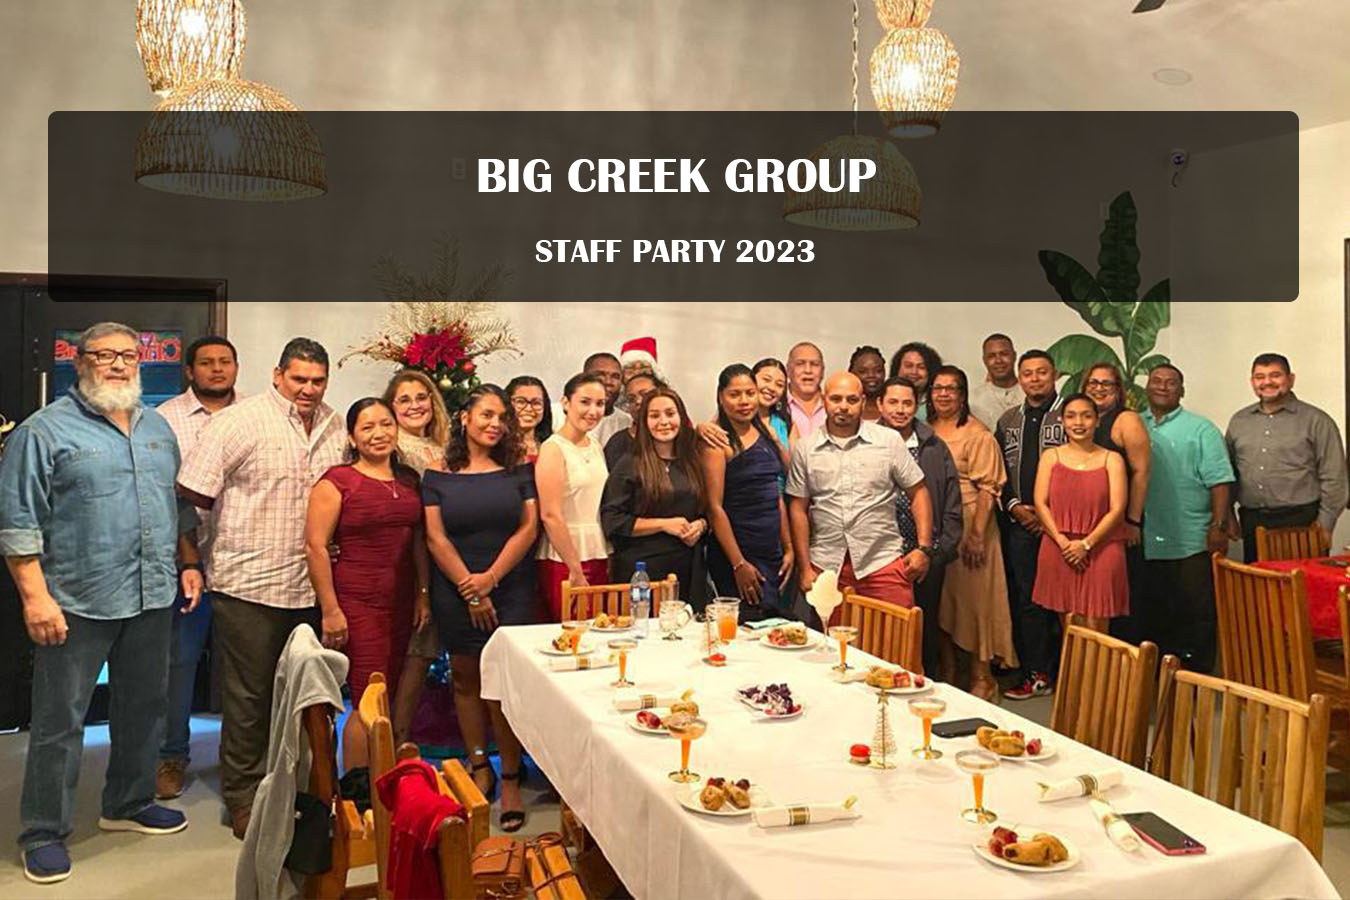 🎉✨ Big Creek Group Staff Party 2023! ✨🎉